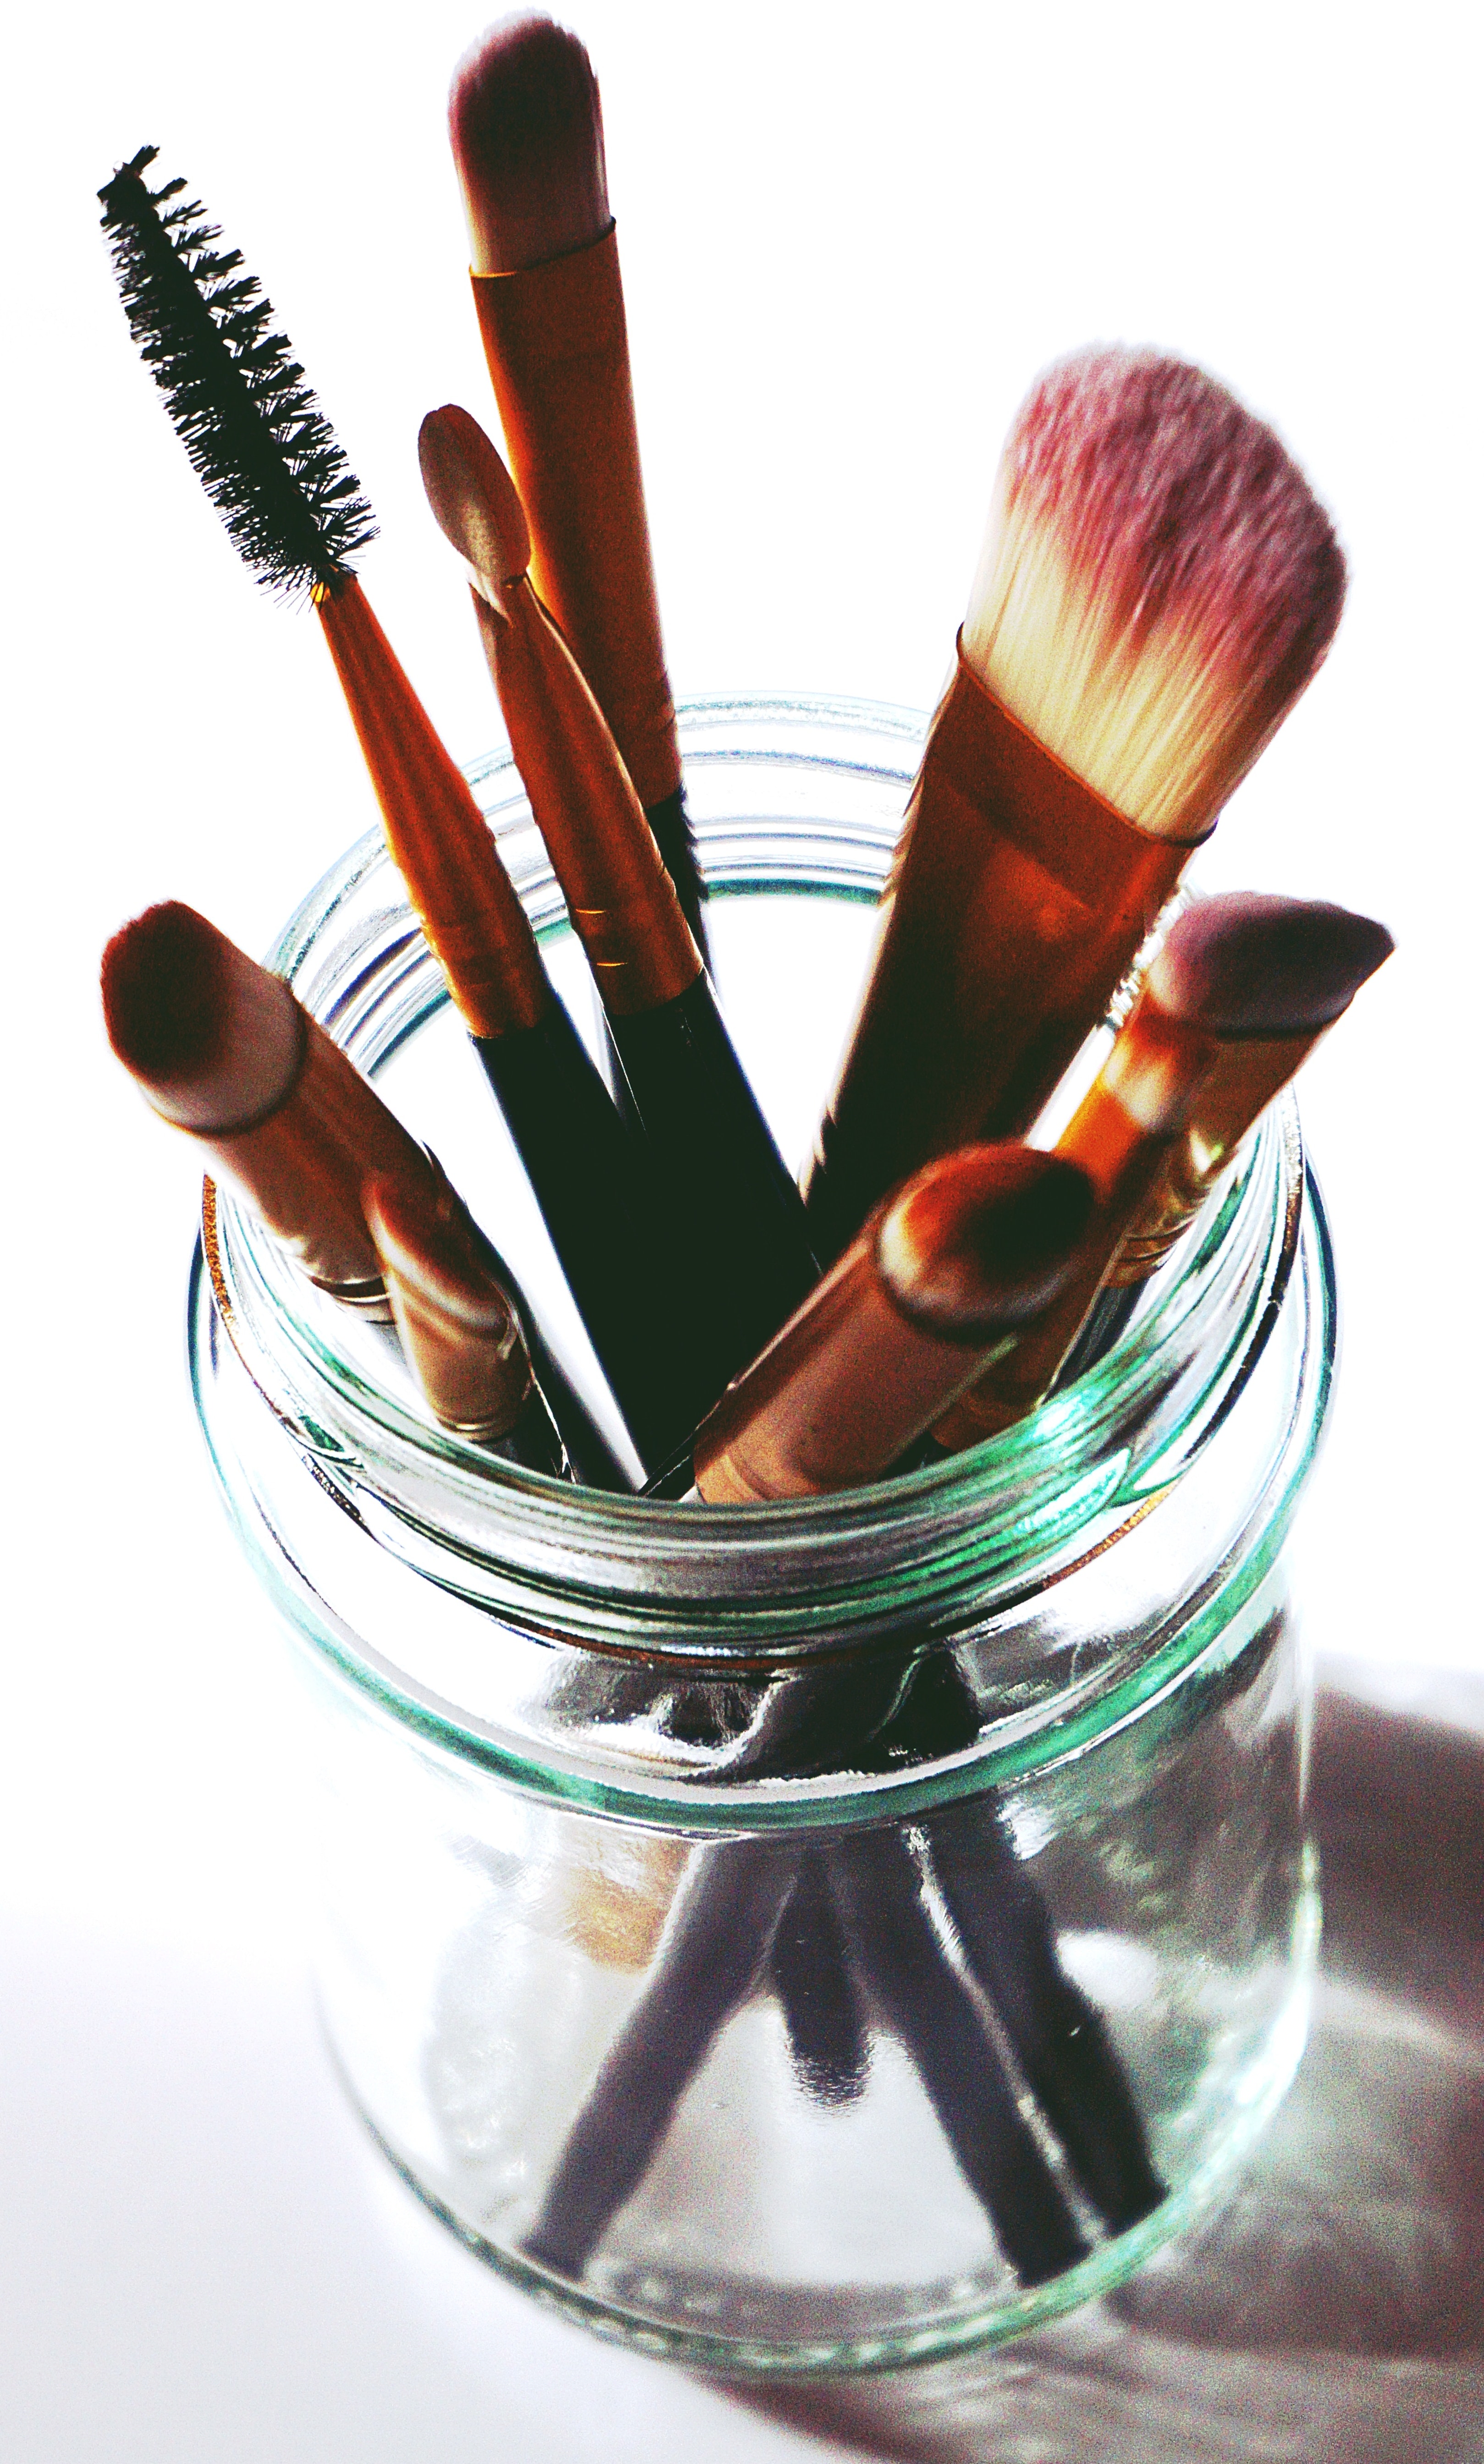 A container of makeup brushes. | Source: Pexels